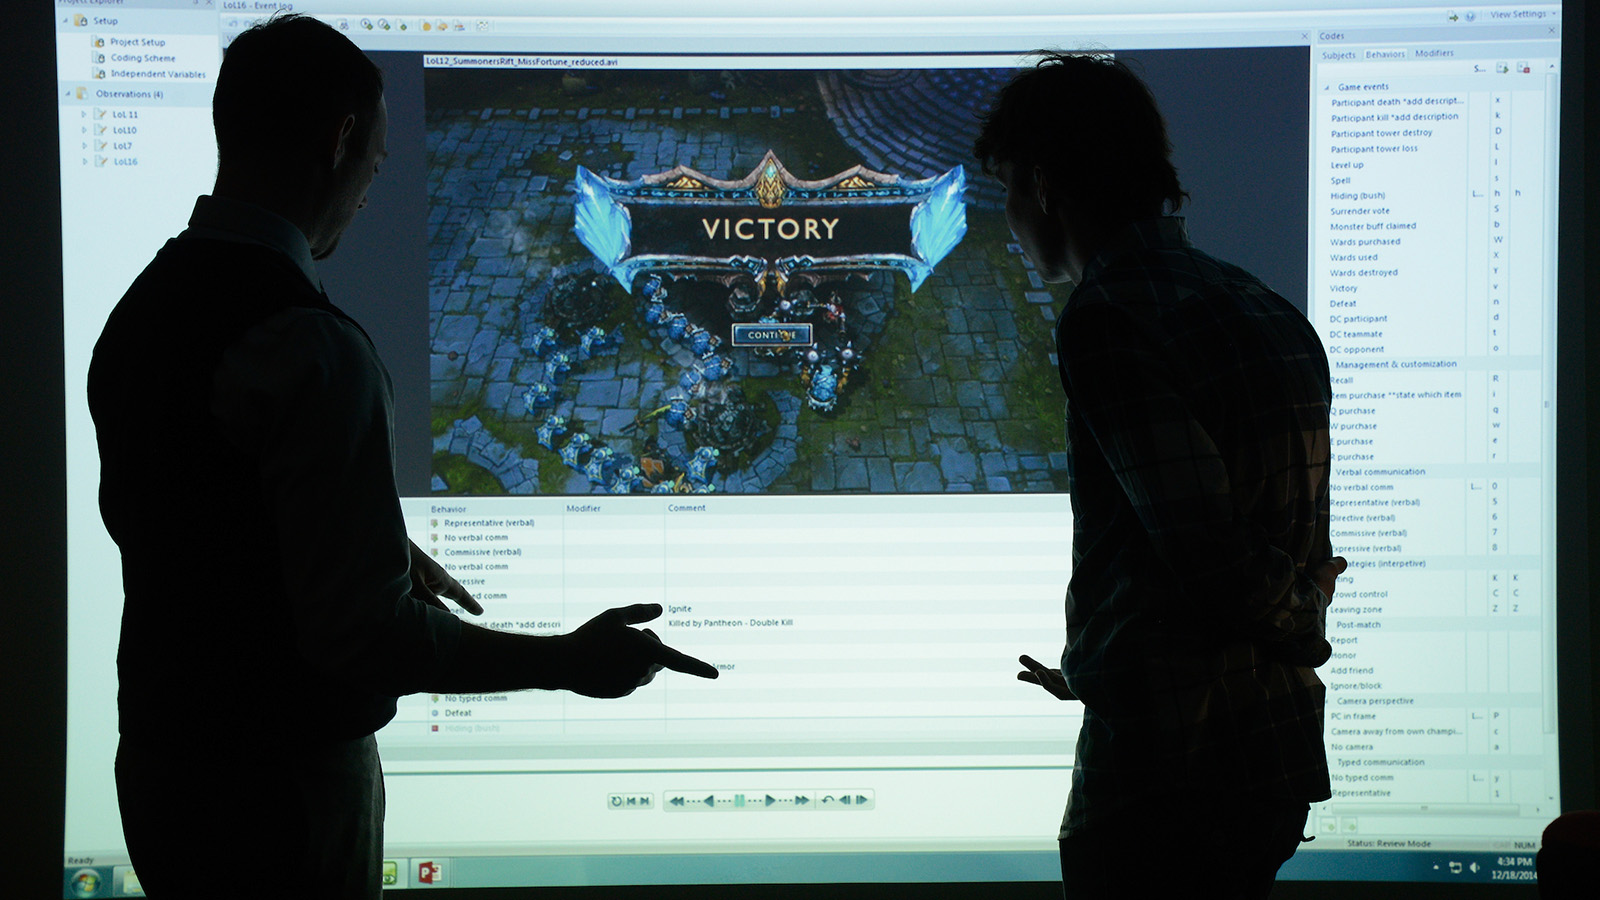 Two men looking at the League of Legends 'Victory' screen